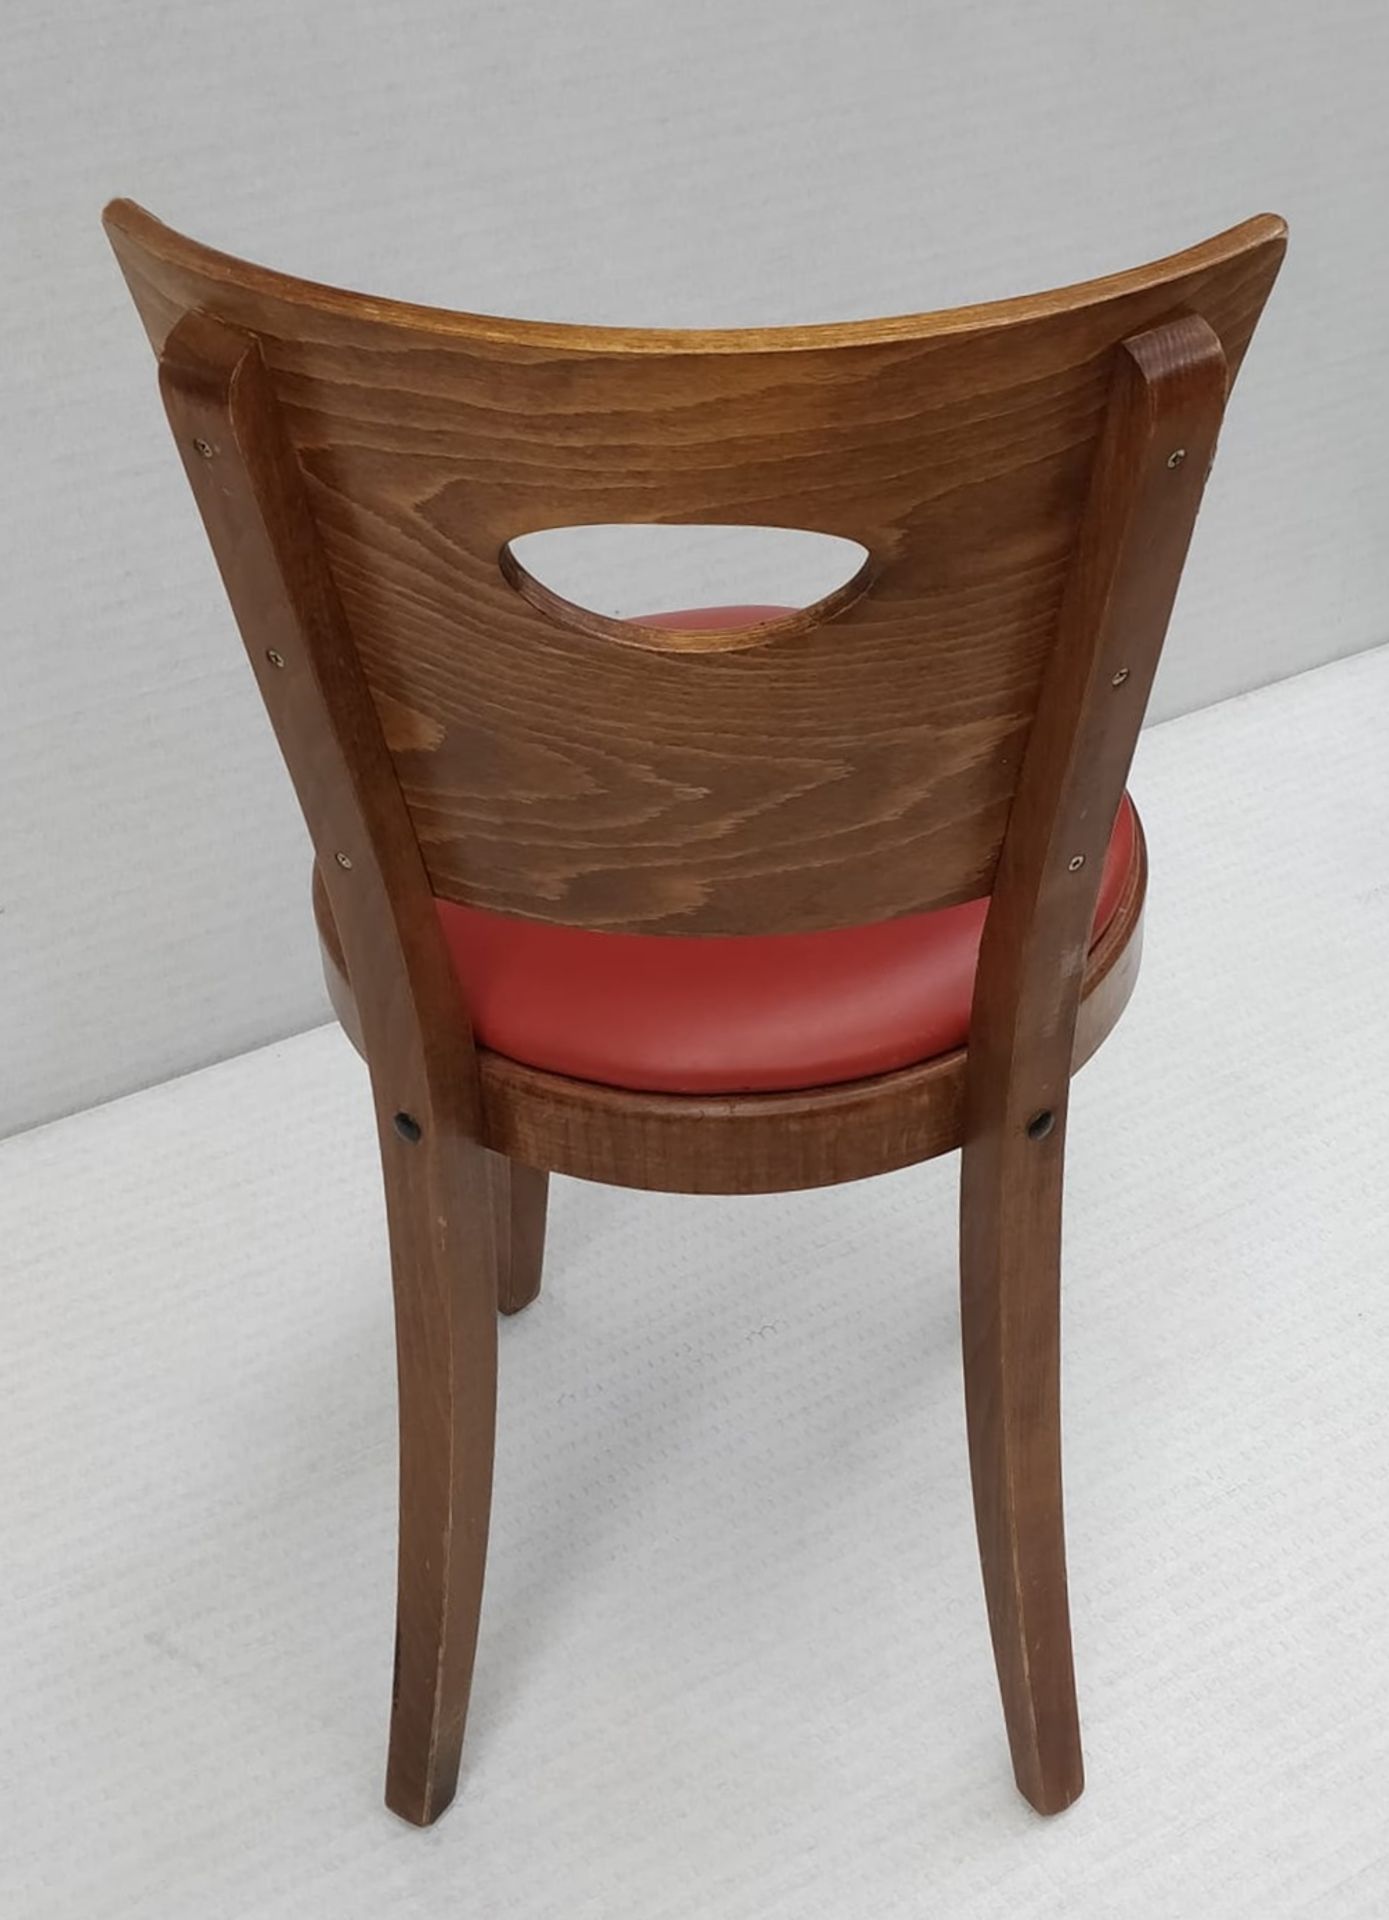 24 x Contemporary Restaurant Dining Chairs With Dark Wood Finish and Red Leather Seat Pads - - Image 4 of 6